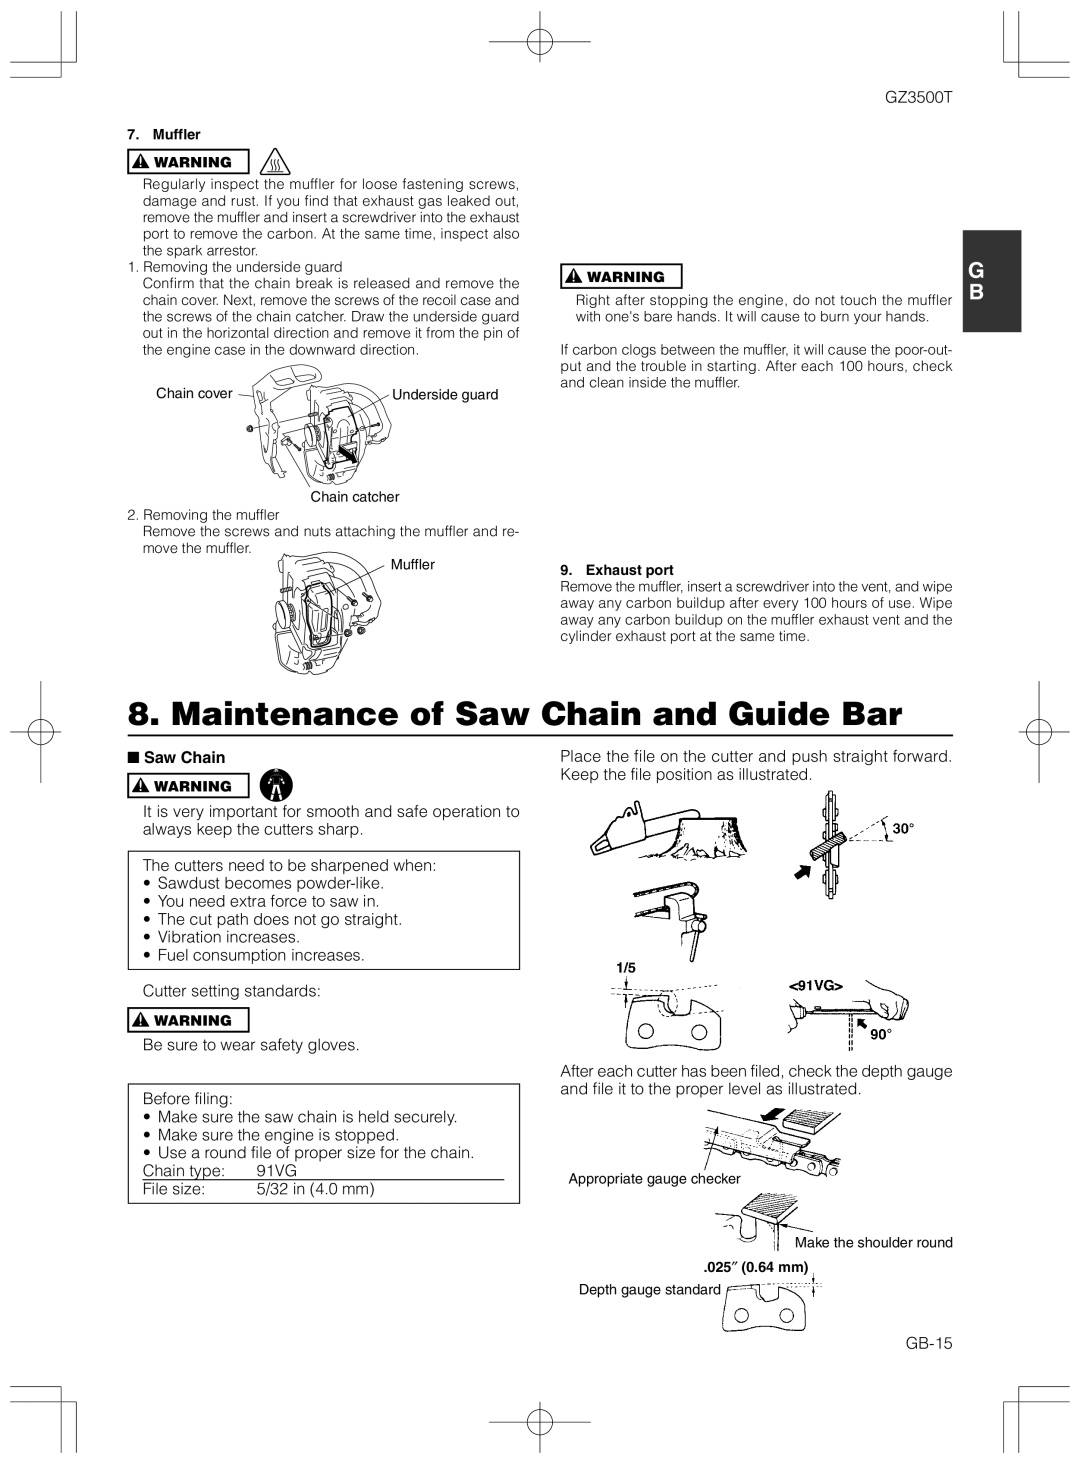 Zenoah GZ3500T owner manual Maintenance of Saw Chain and Guide Bar 